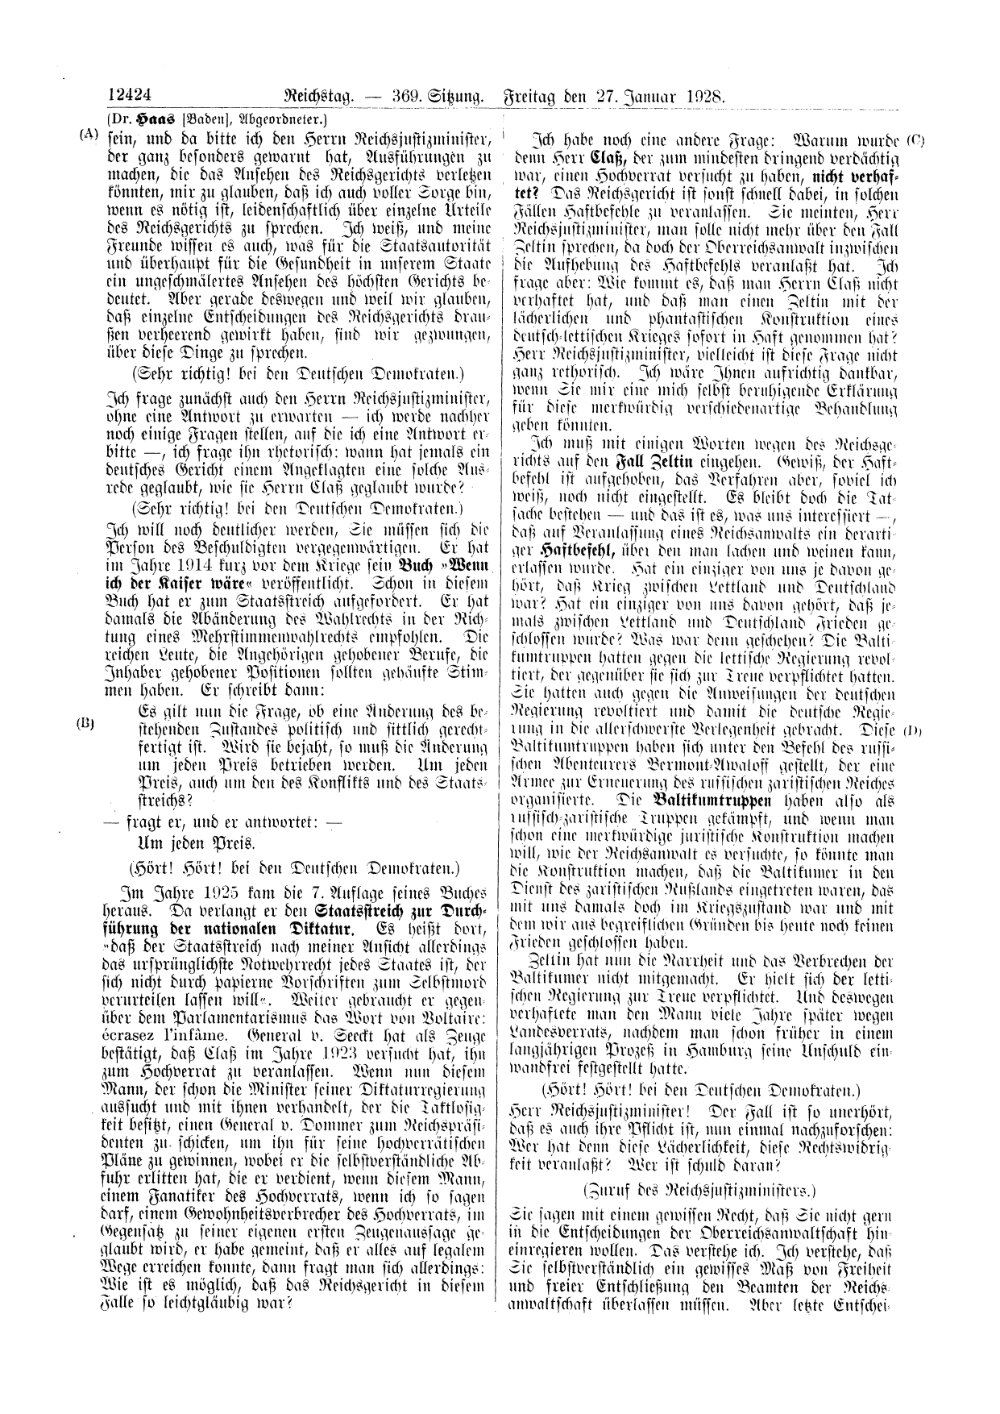 Scan of page 12424